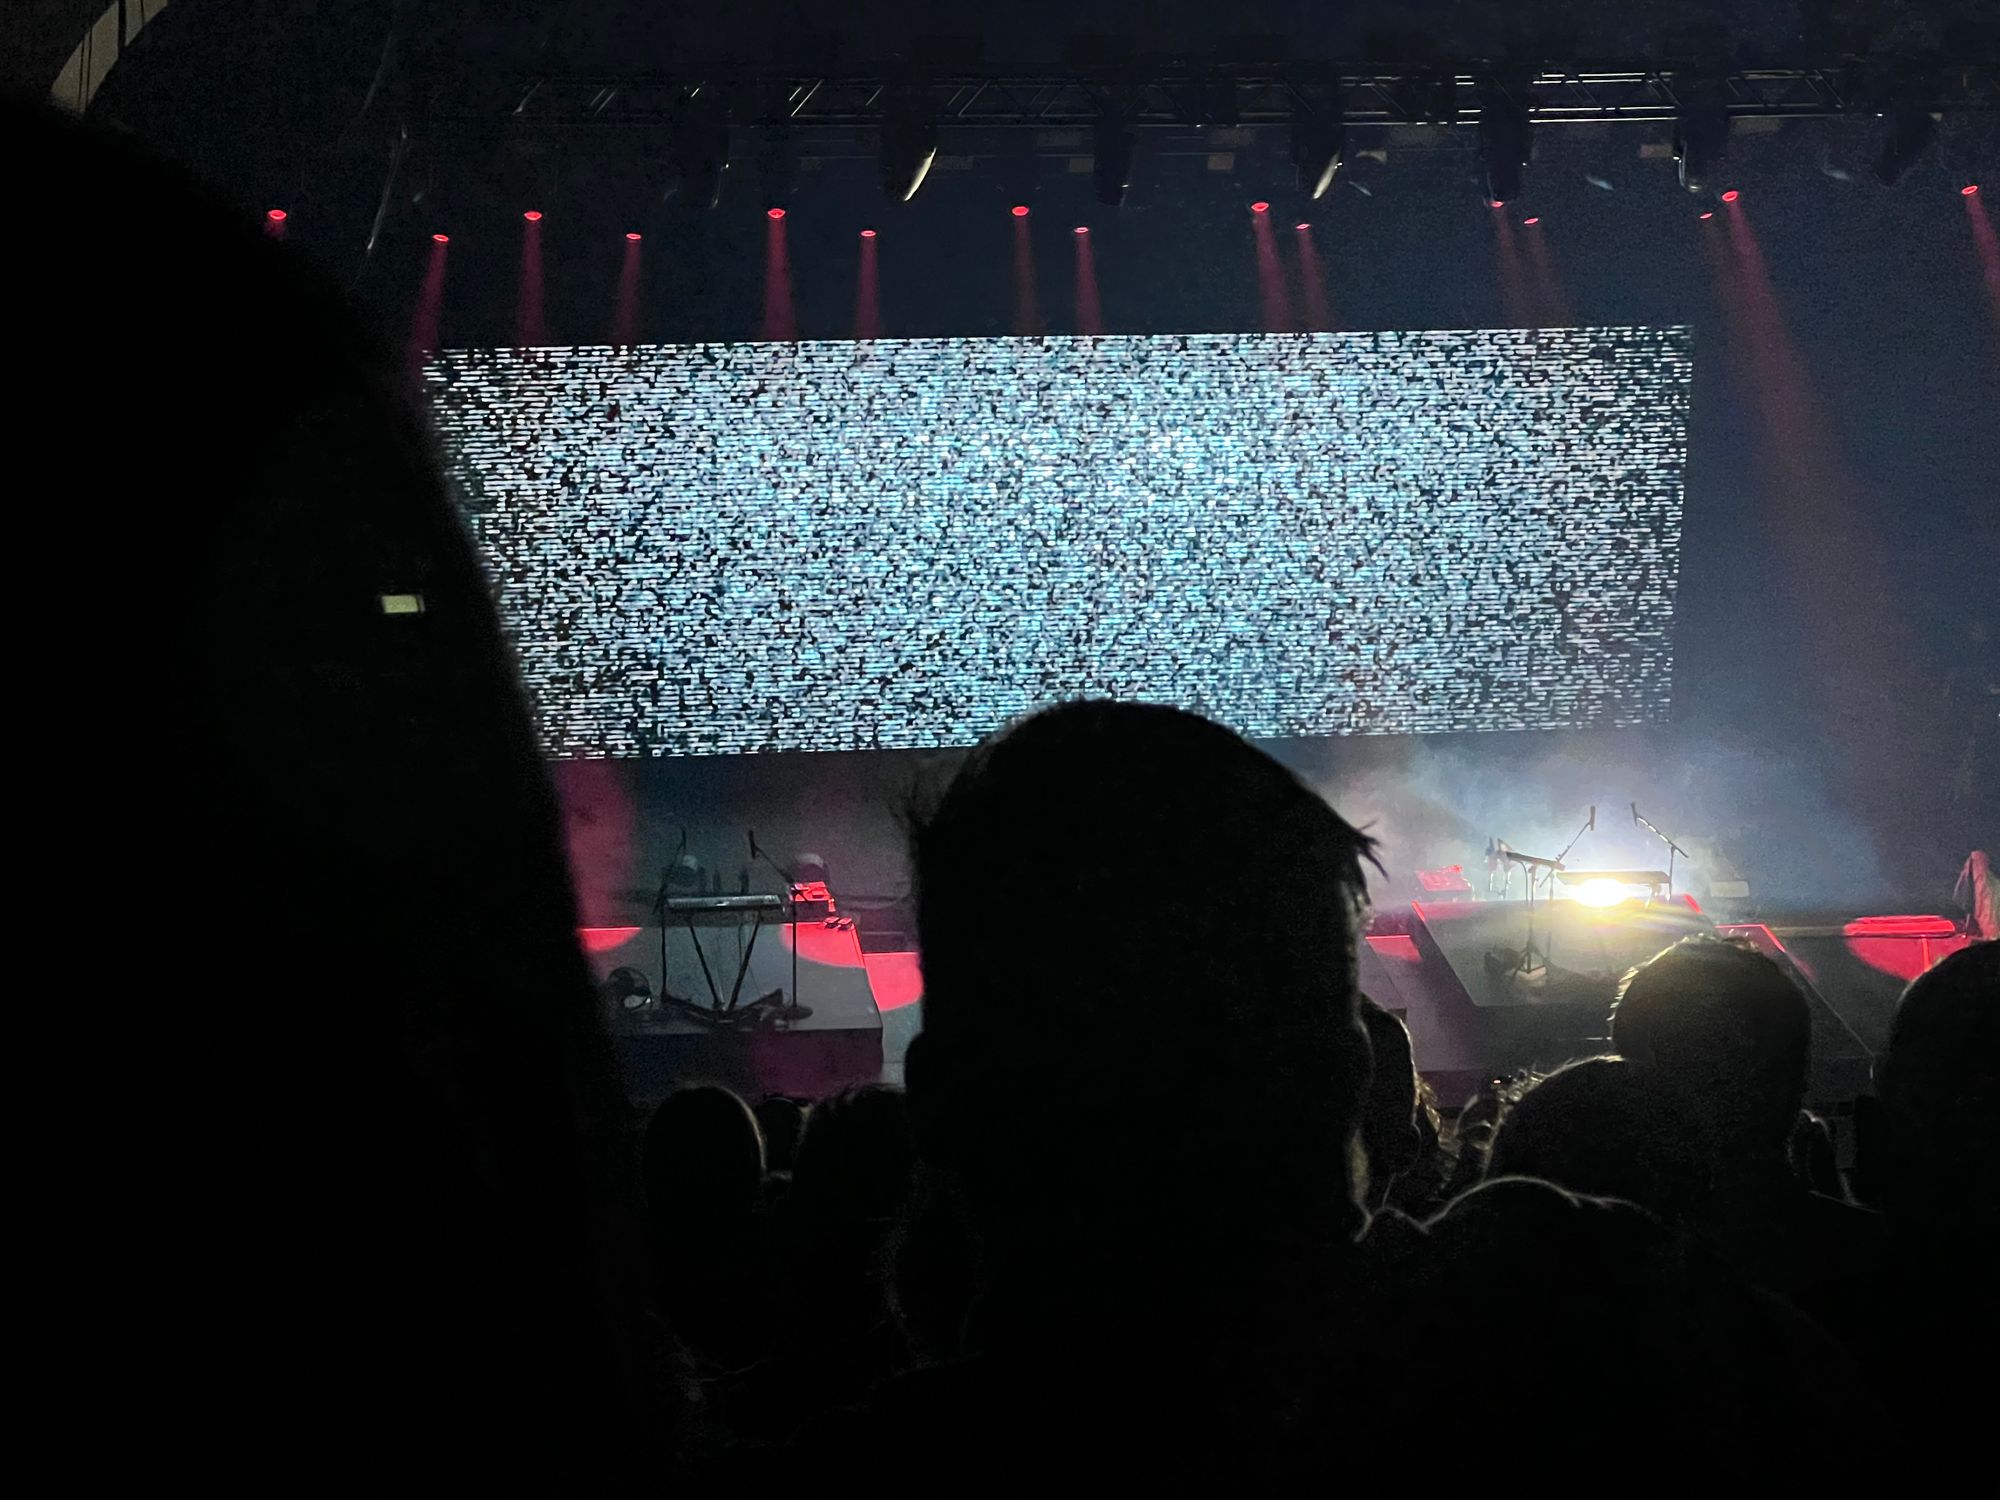 A stage with a big screen through a crowd. The screen displays a distorted white noise pattern.